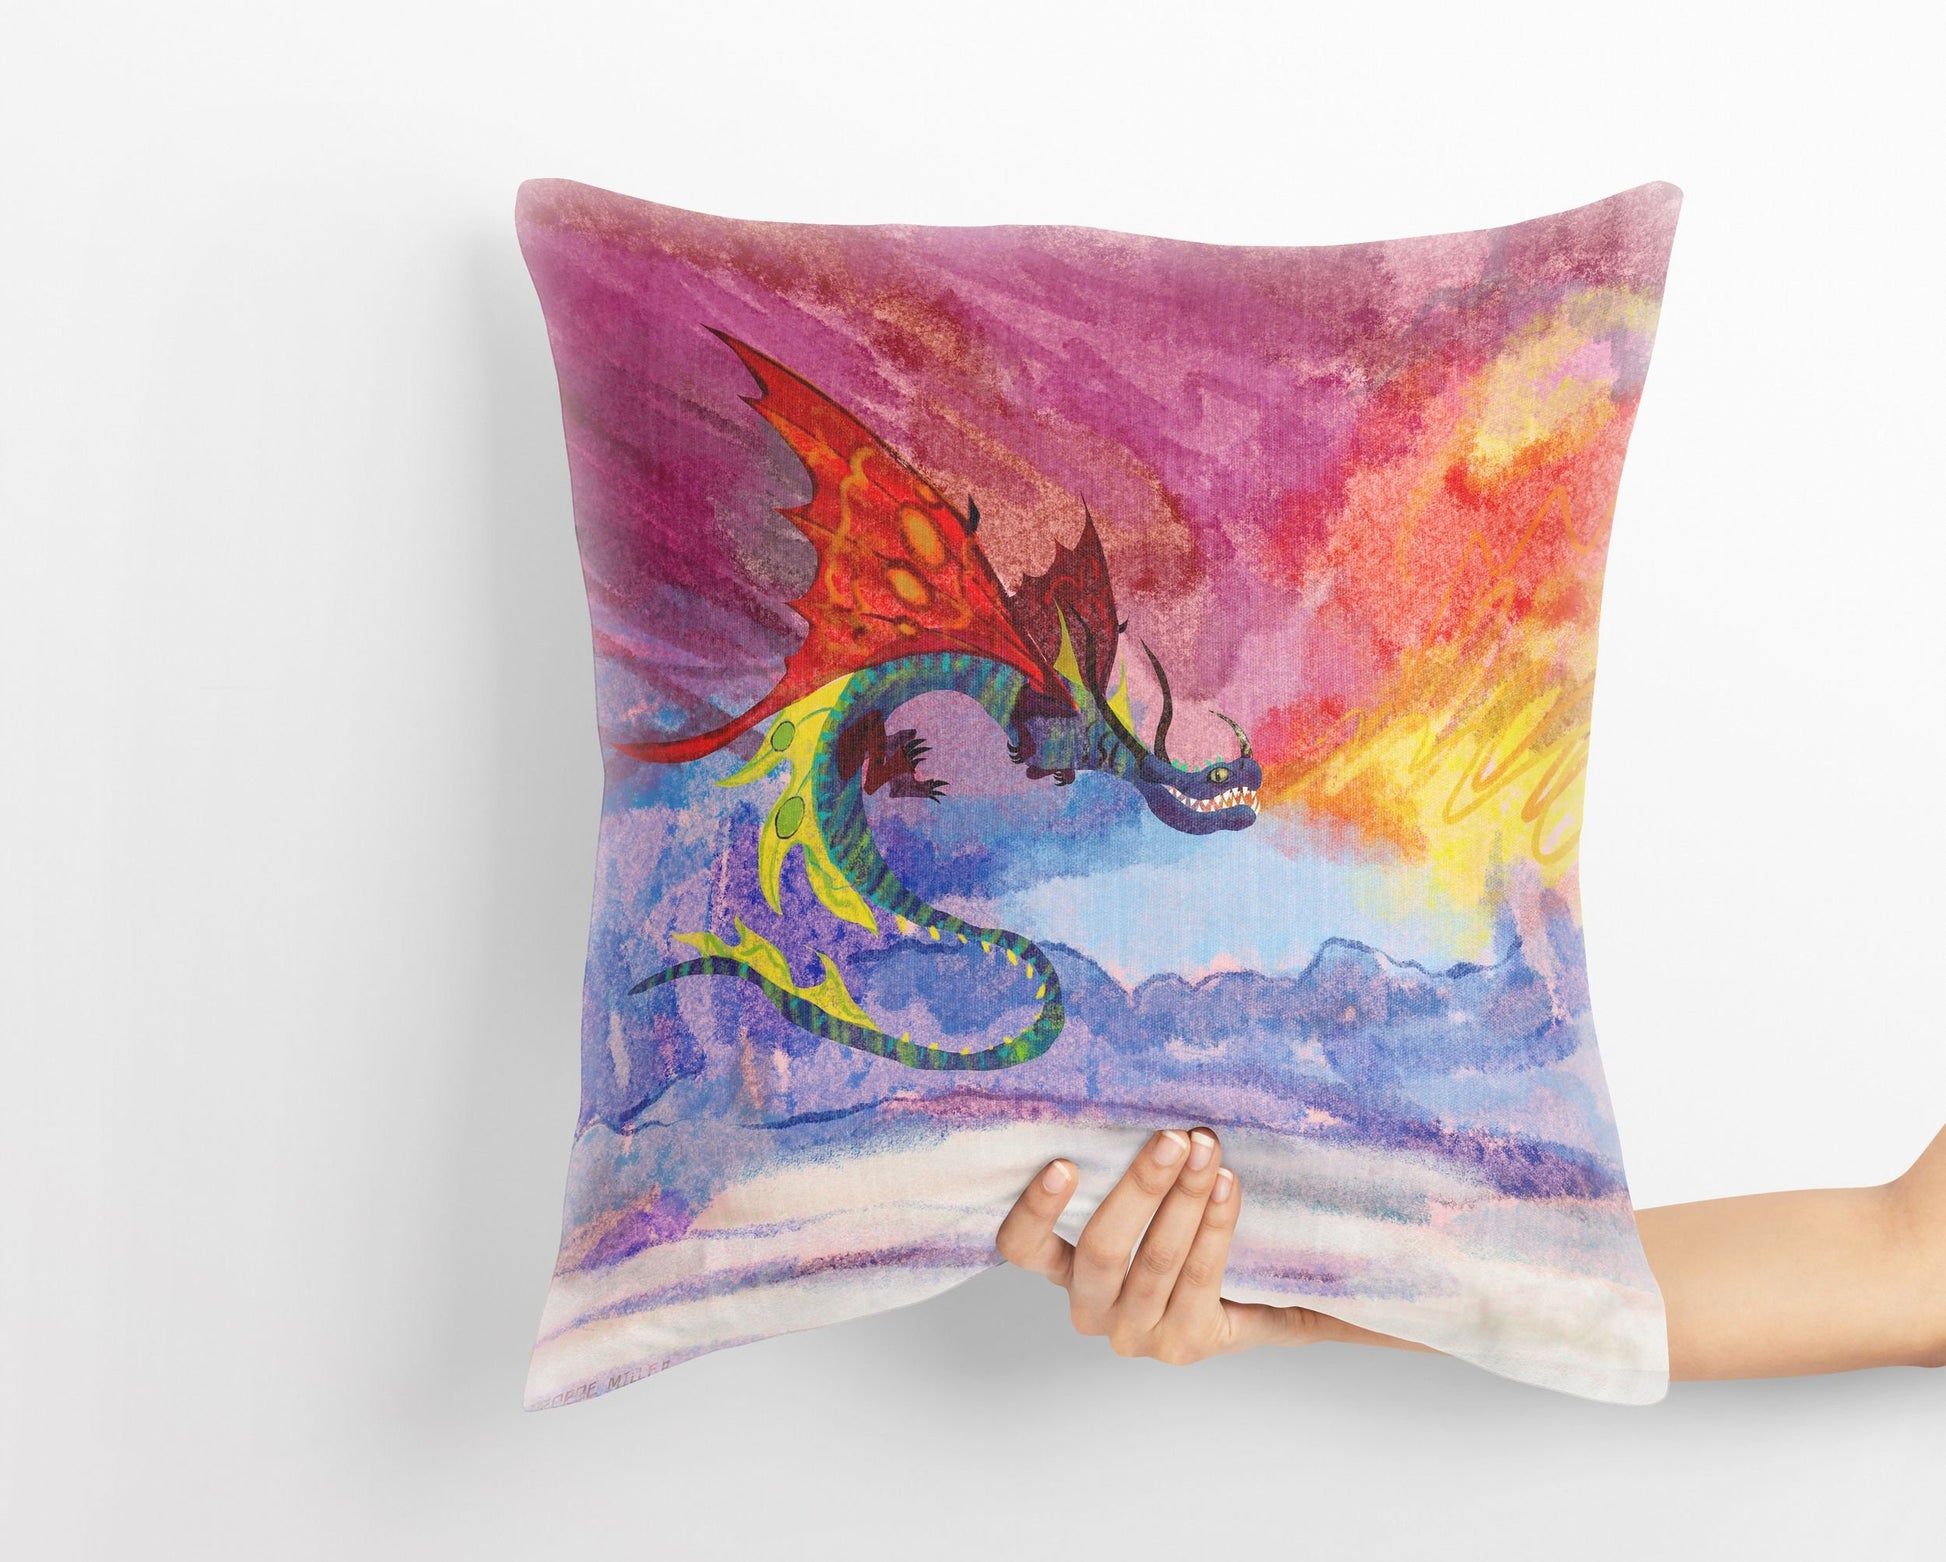 Fire Breathing Dragon Fantasy Pillow Cases For Kids, Throw Pillow, Abstract Art Pillow, Original Art Pillow, Red Pillow Cases, Fashion